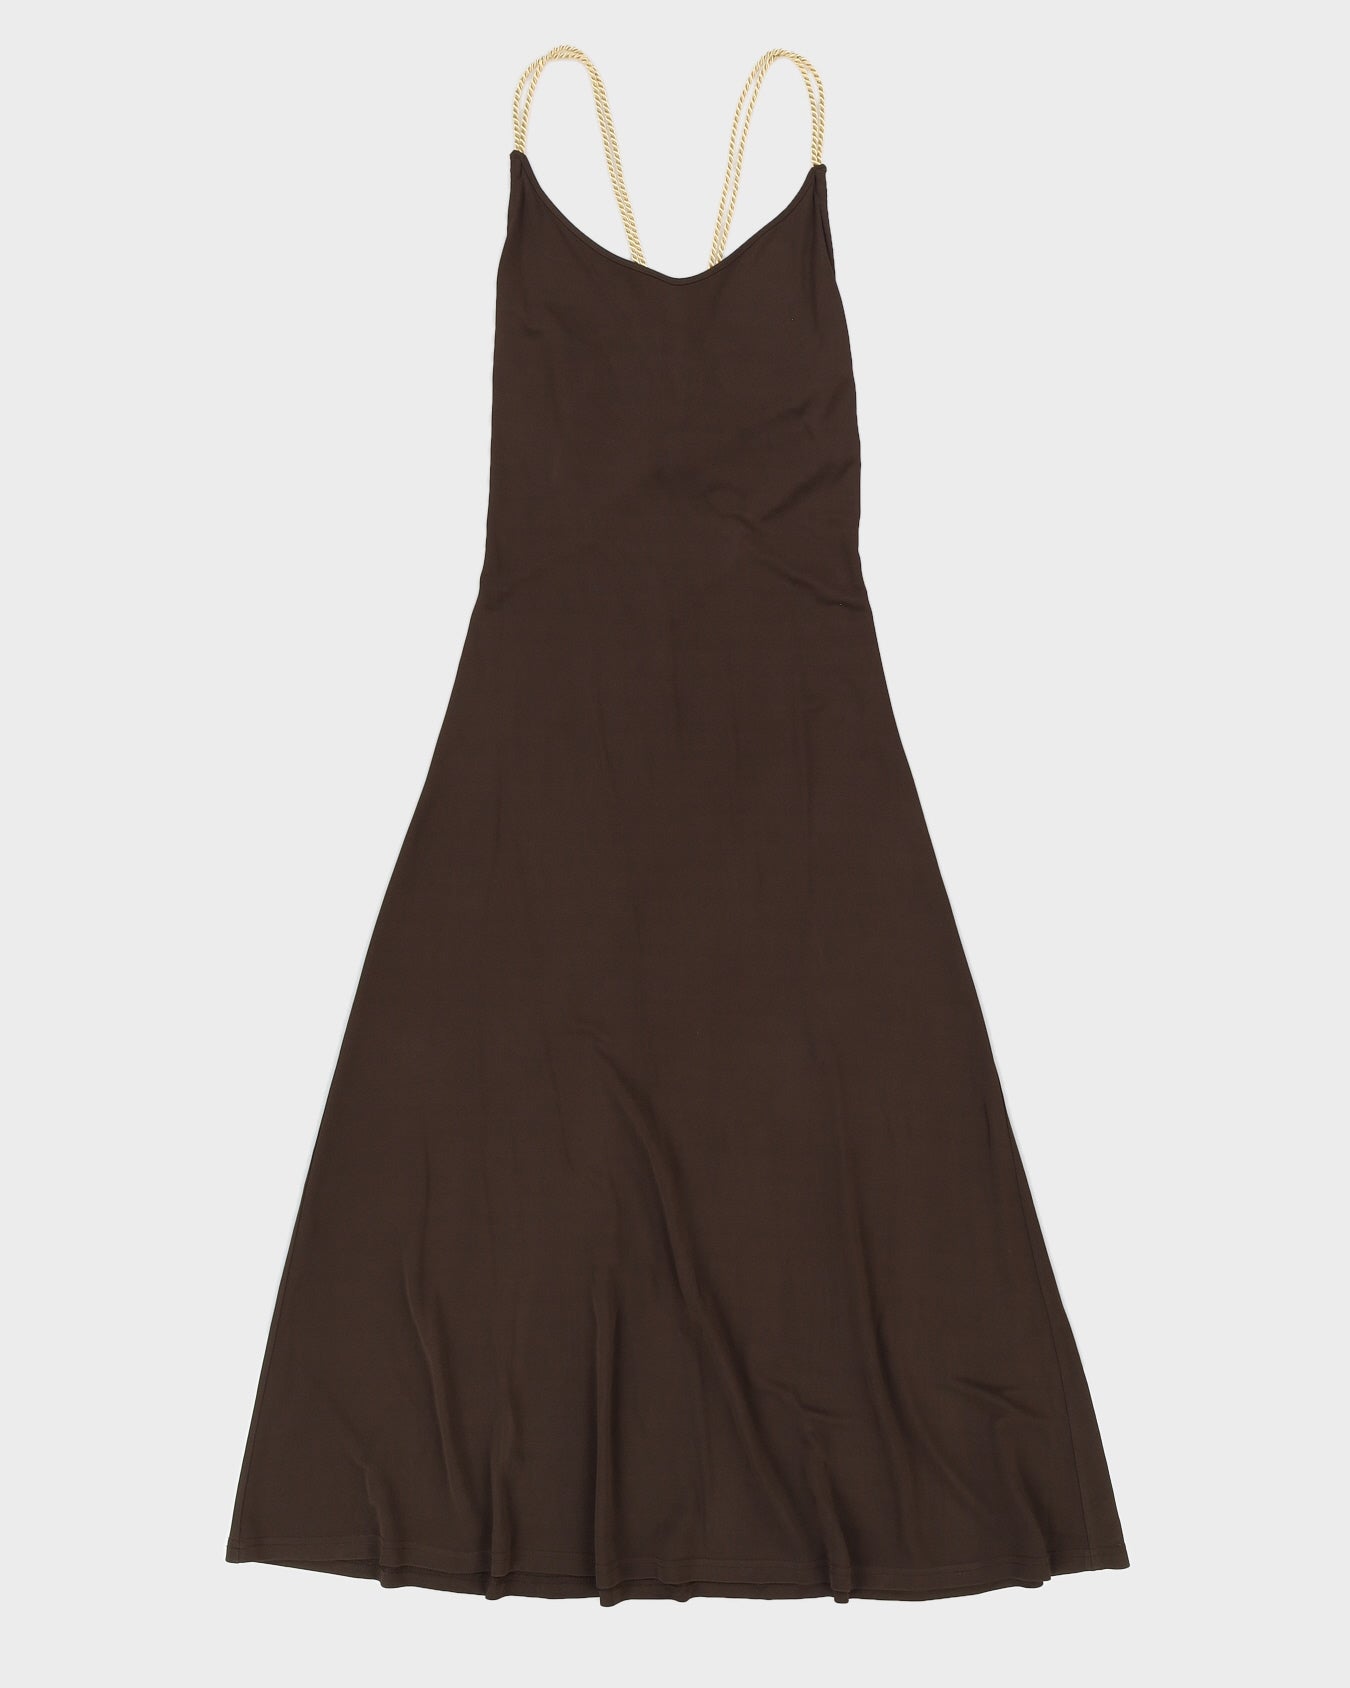 Celine Brown Maxi Dress With Gold Rope Strap - 36